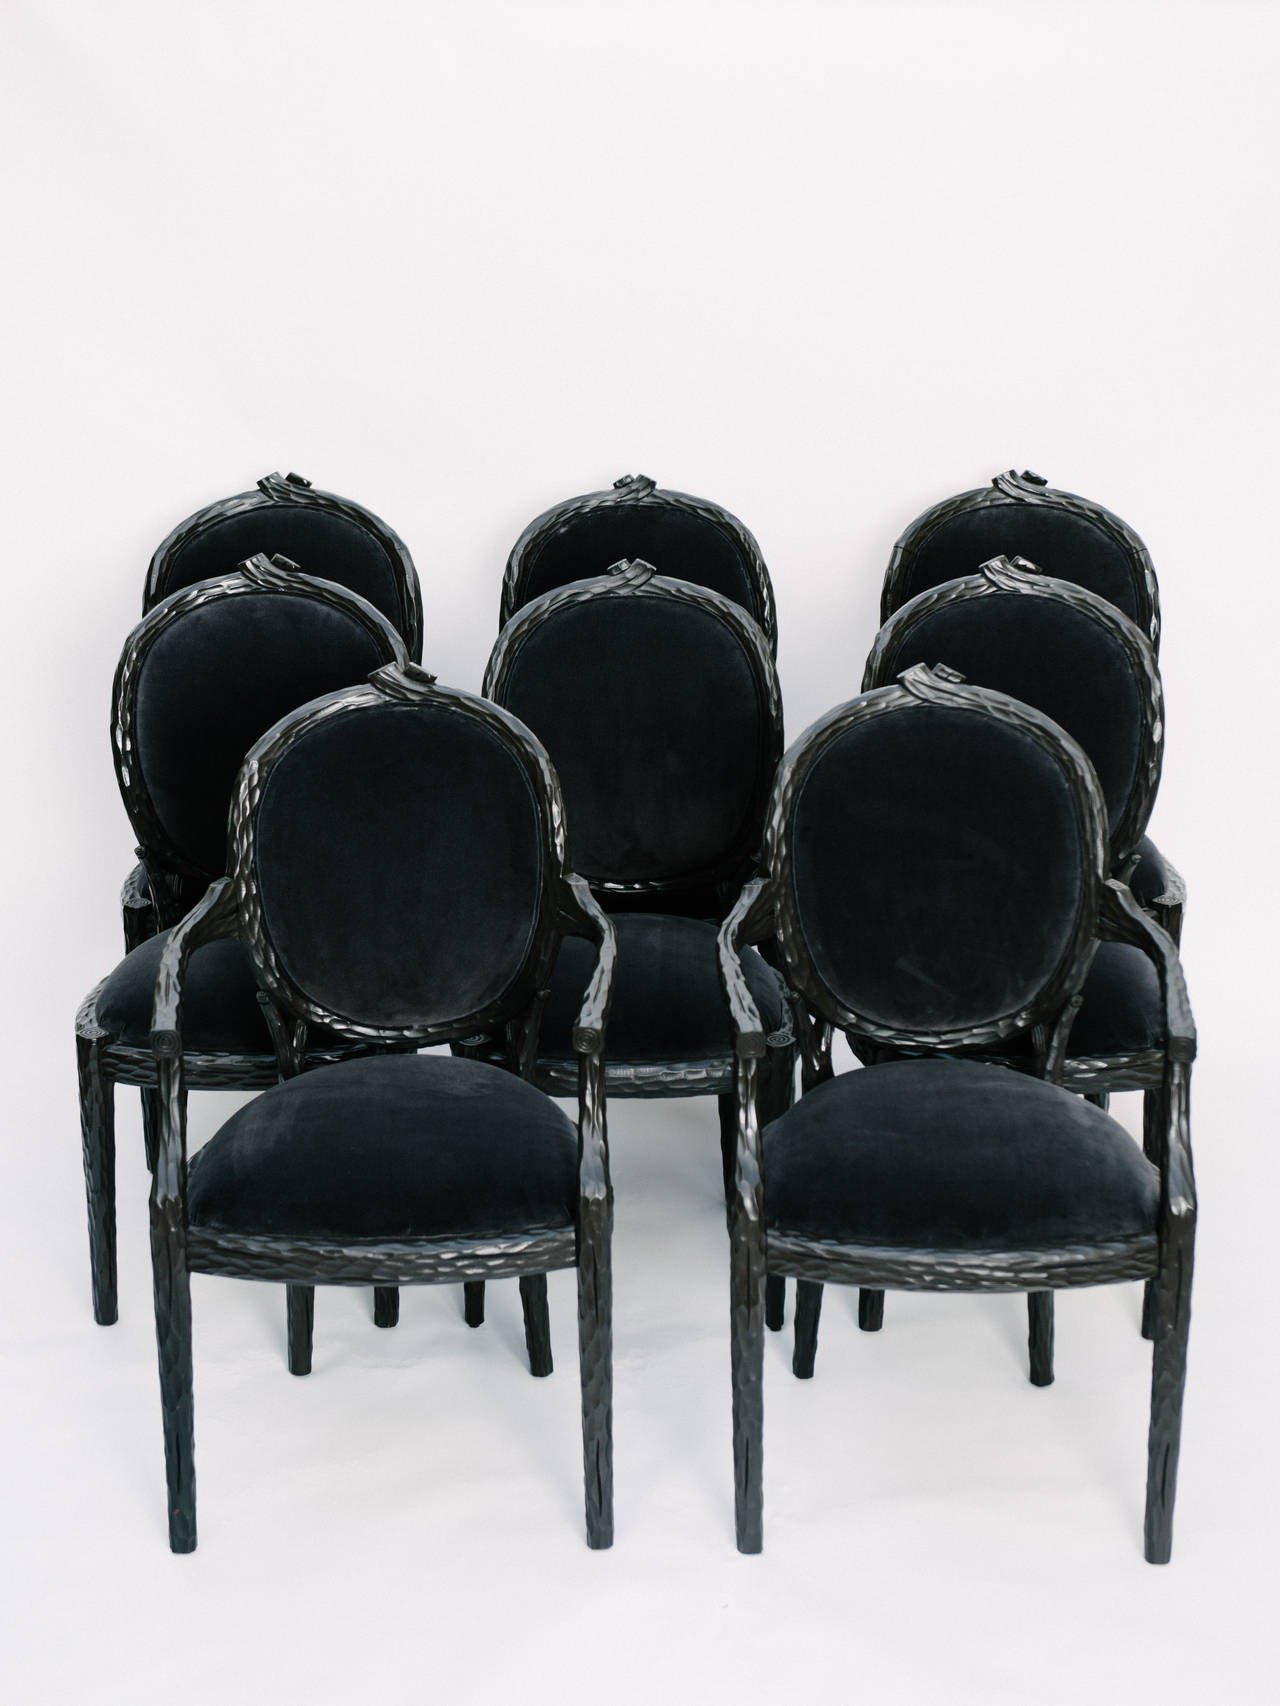 Set of eight Italian dining chairs newly refinished and upholstered in charcoal velvet. Two armchairs and six side chairs.